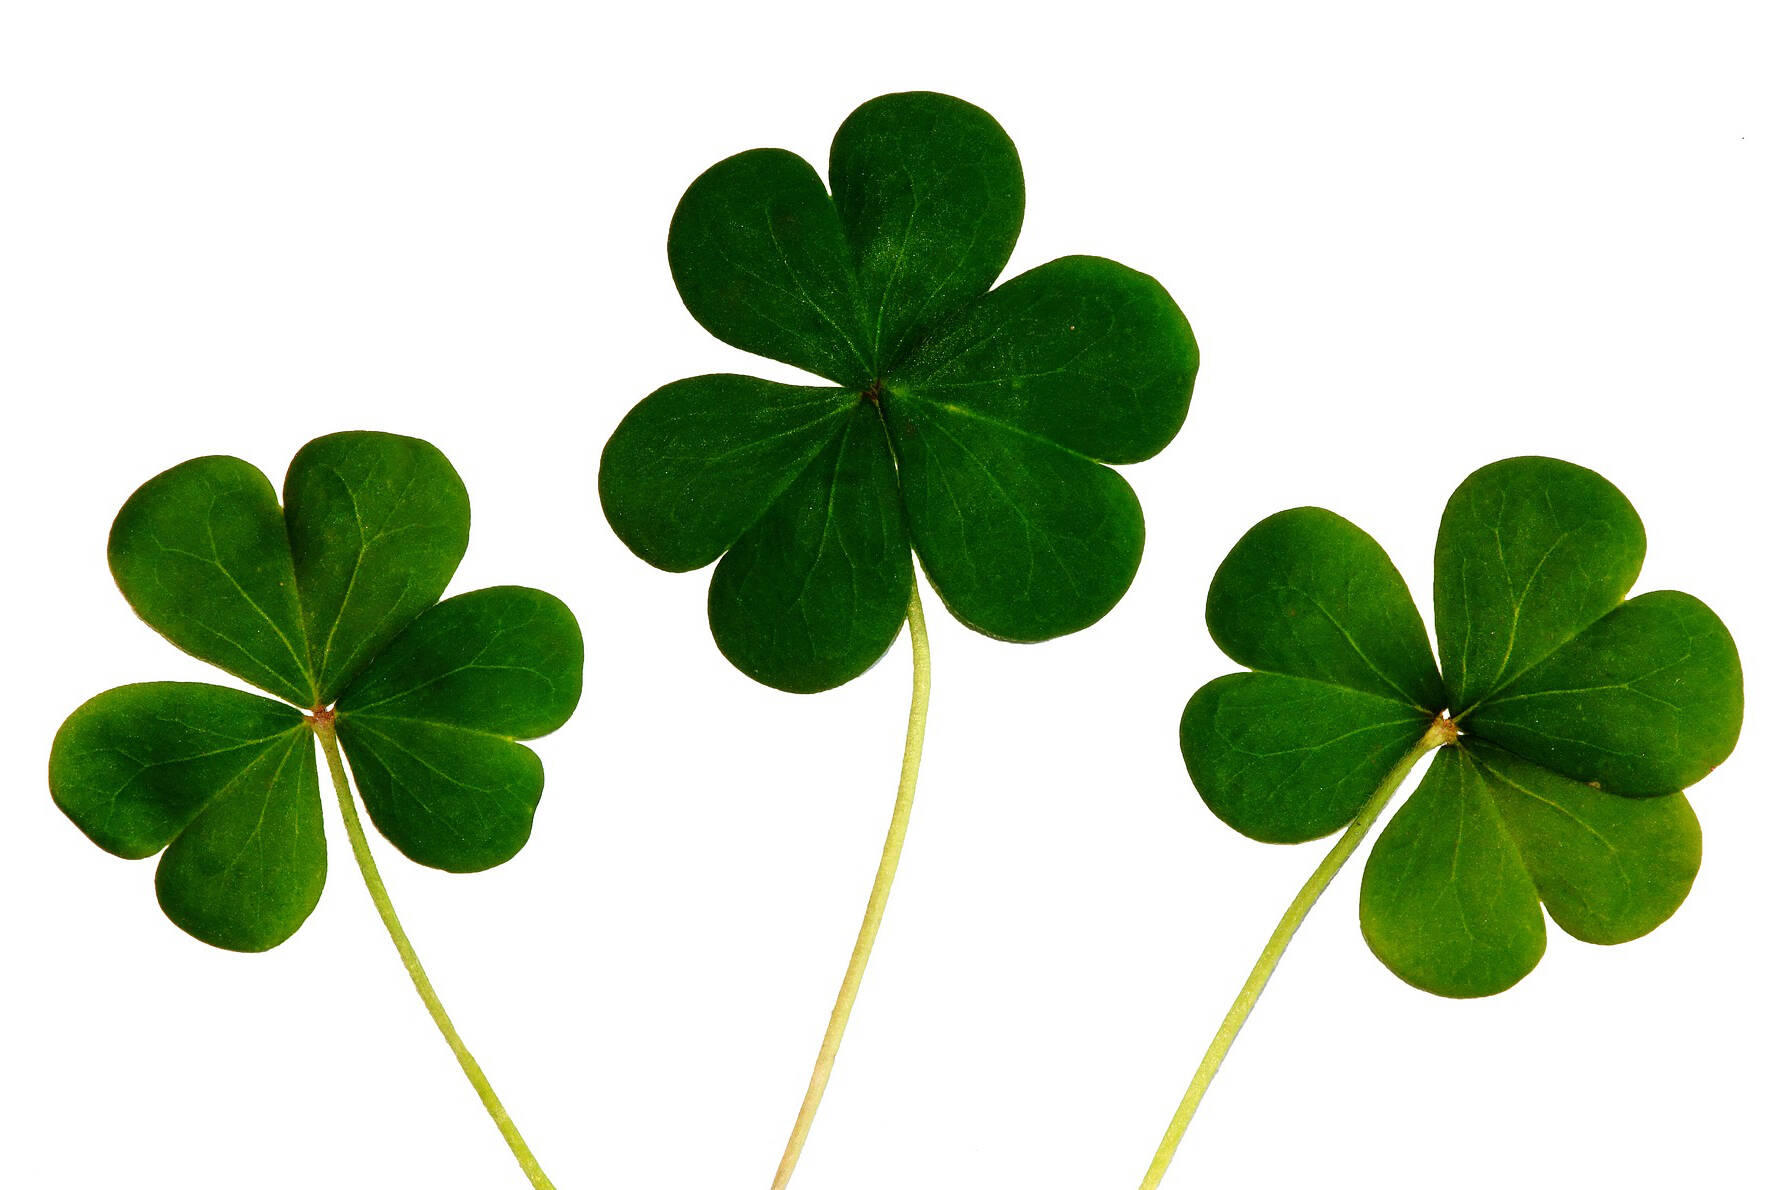 Shamrocks are associated with Ireland, but a four-leaf clover is much more rare. Do you know the odds of finding a four-leaf clover? (Pixabay.com)